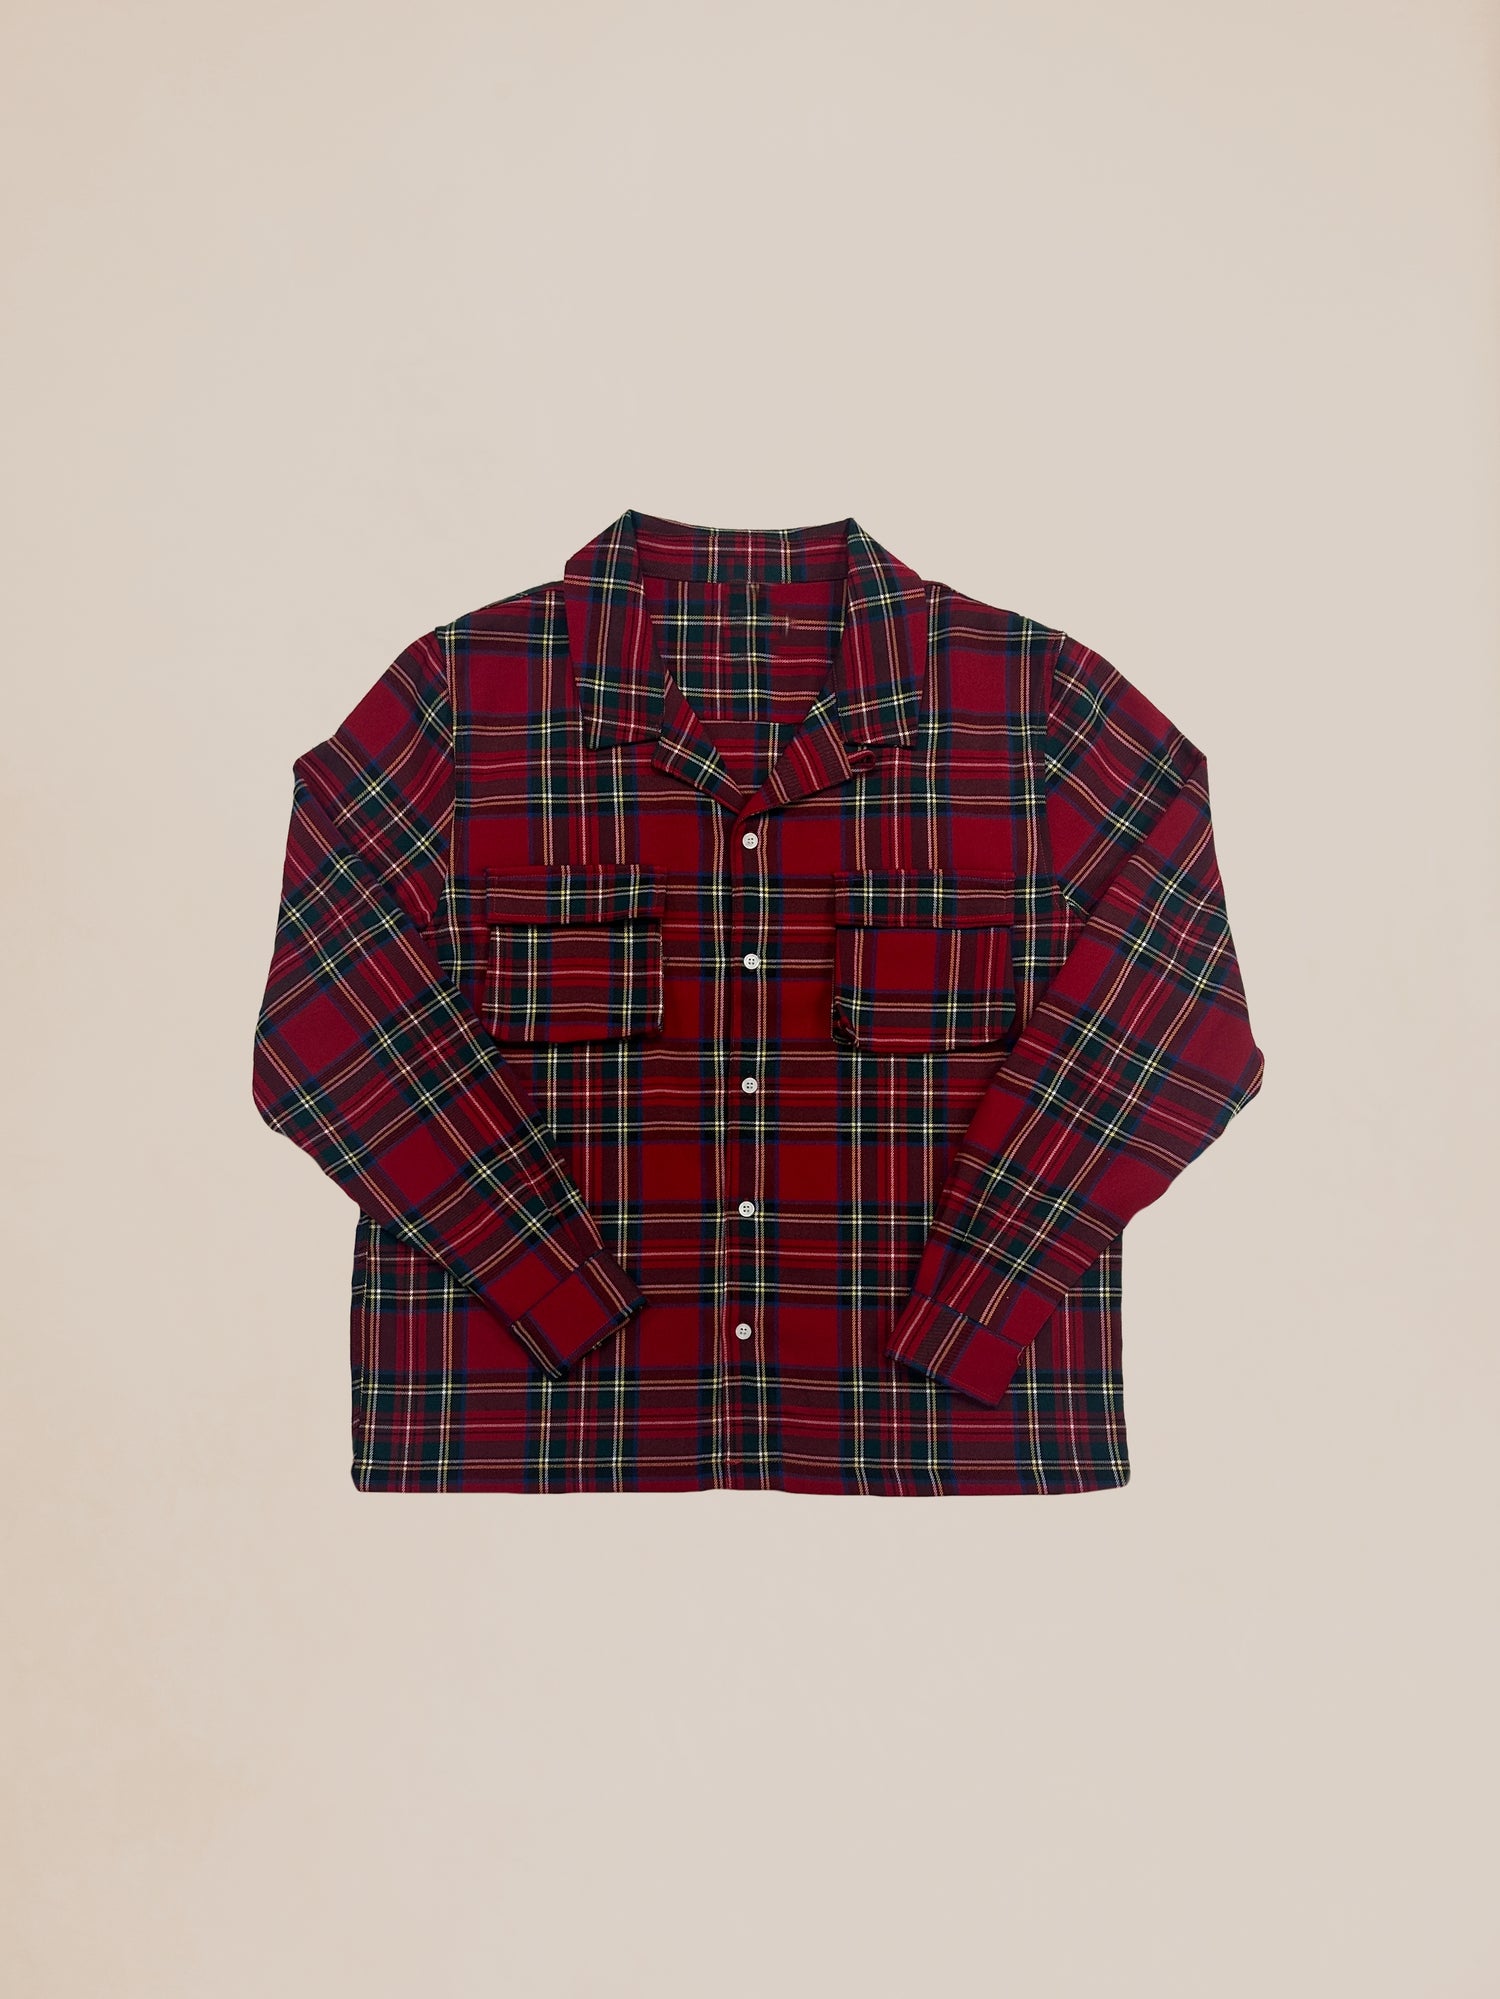 A red Sample 70 plaid long sleeve camp shirt by Profound laid flat on a light background.